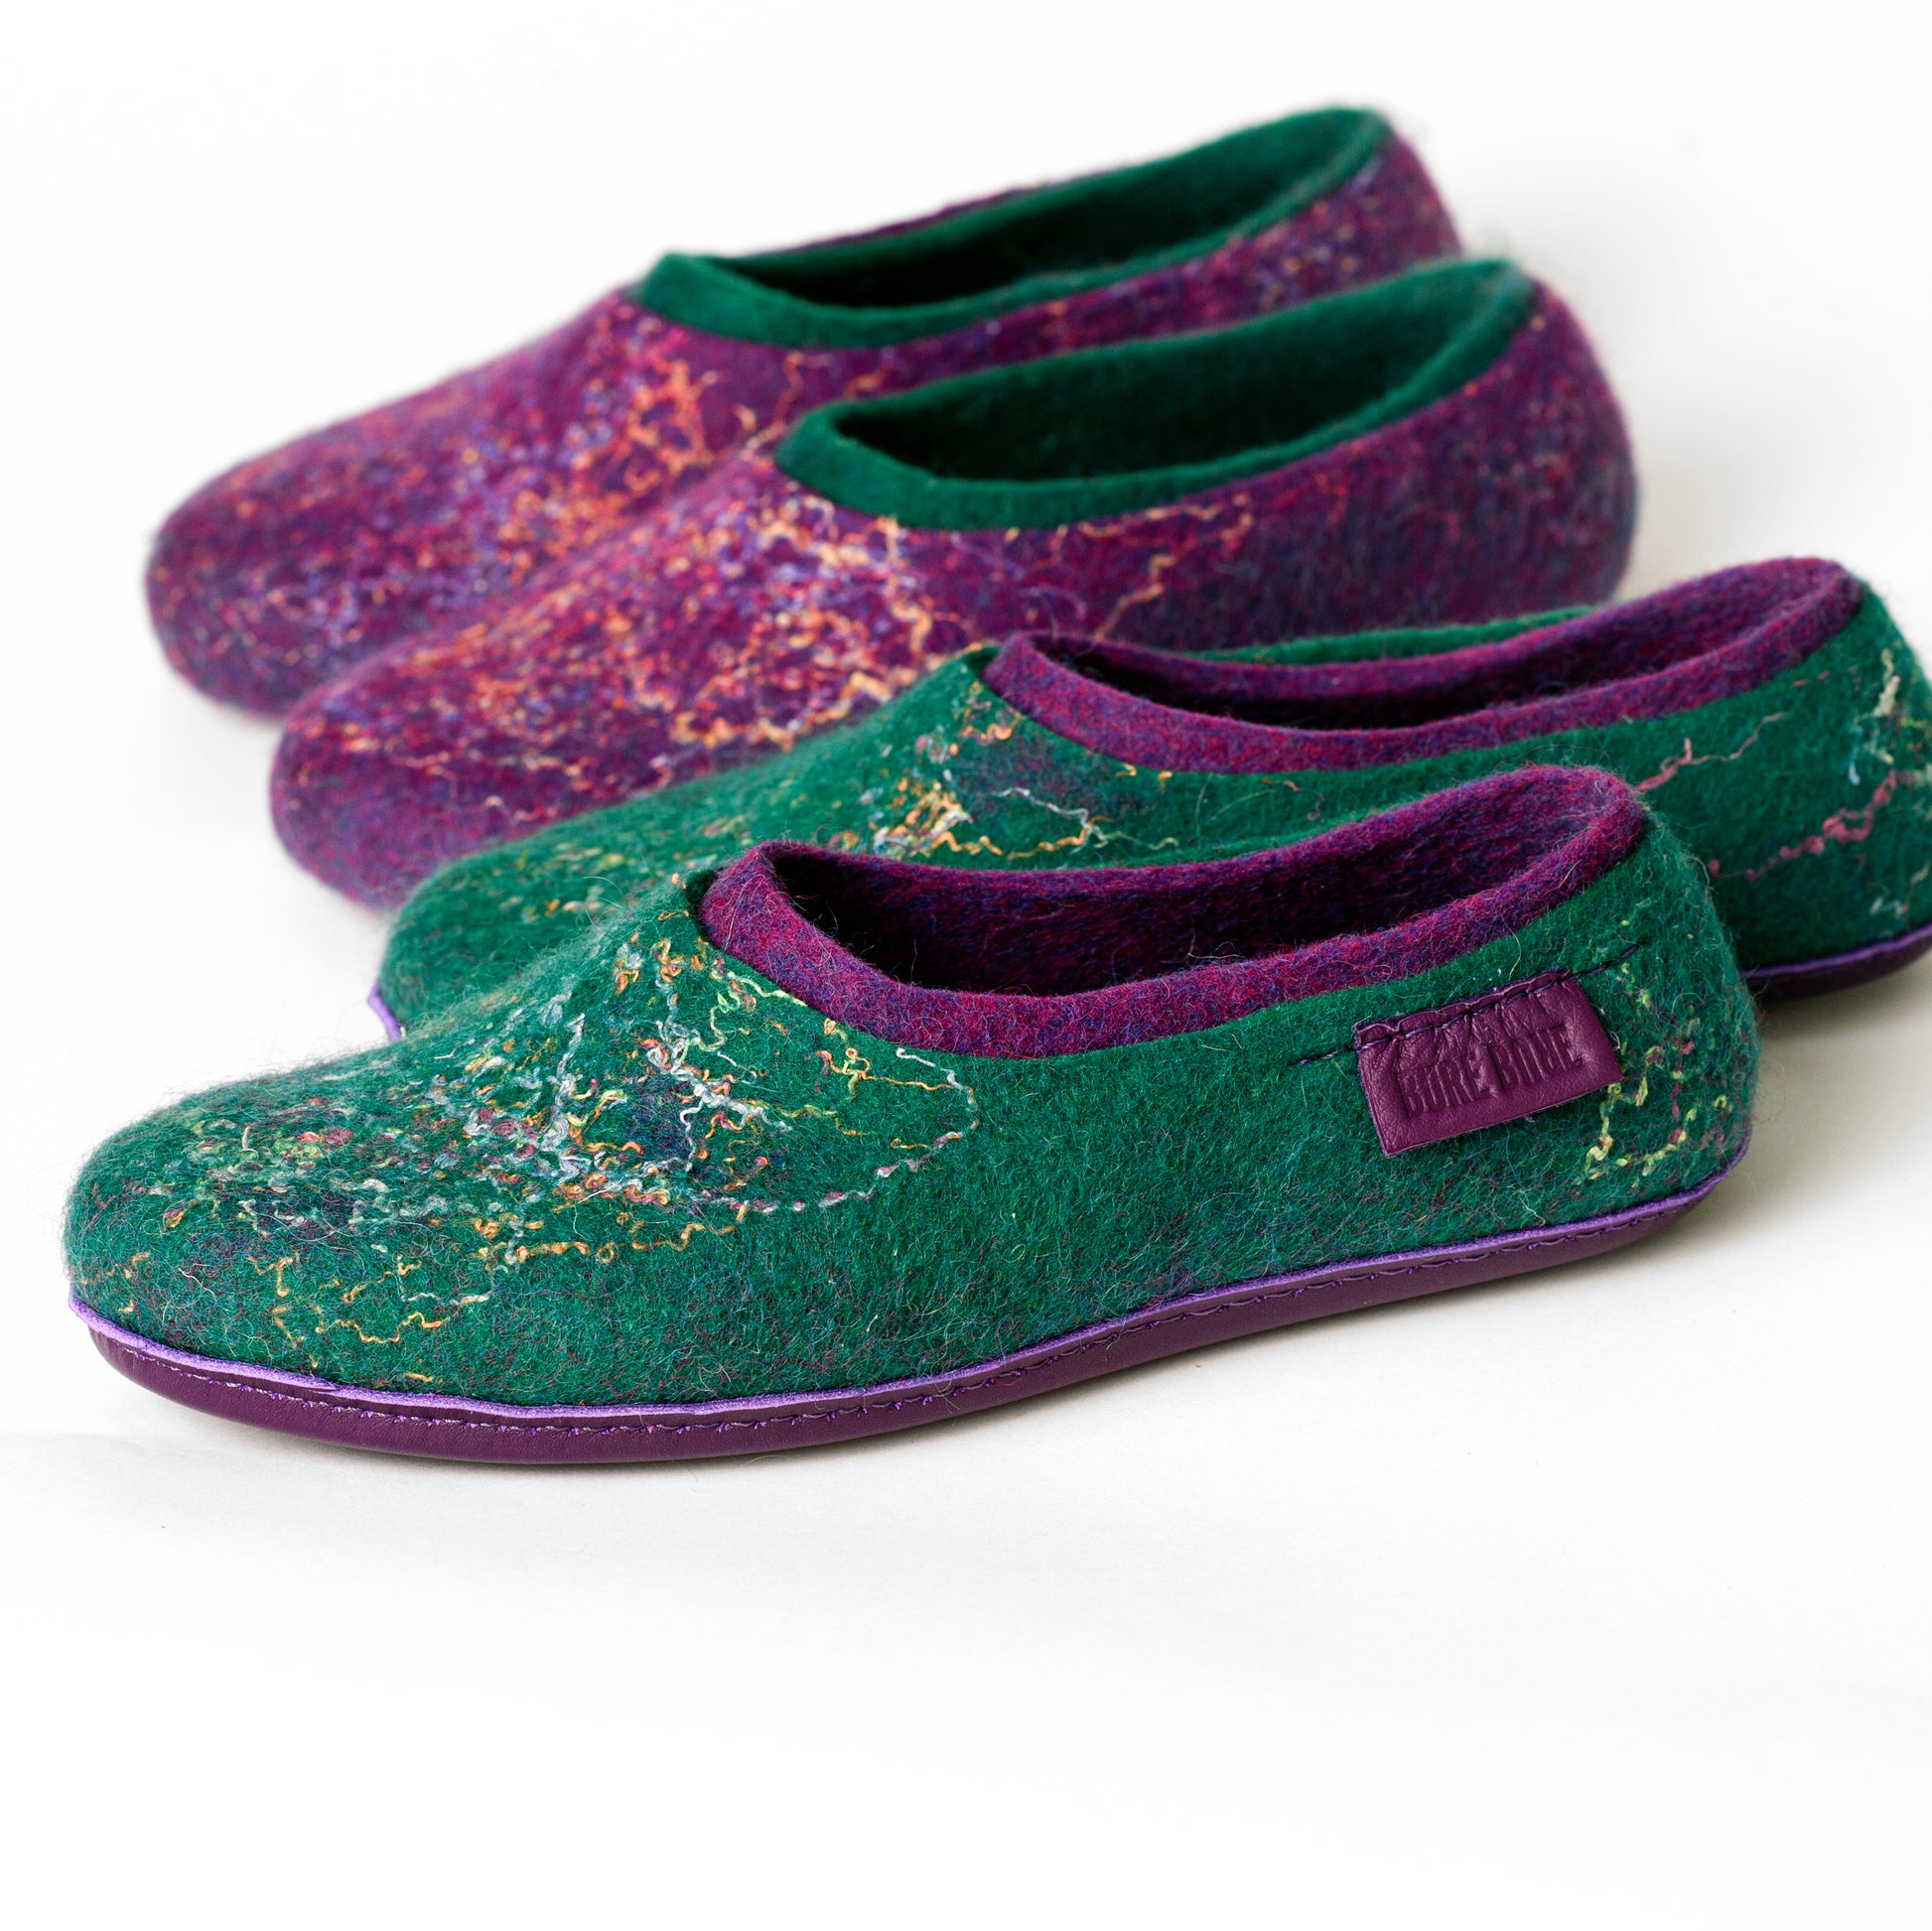 [felted_slippers],[wool_slippers], [burebure_slippers], [warm_wool_slippers], Green/Purple 2in1 Slippers with Linen Threads, BureBure shoes and slippers